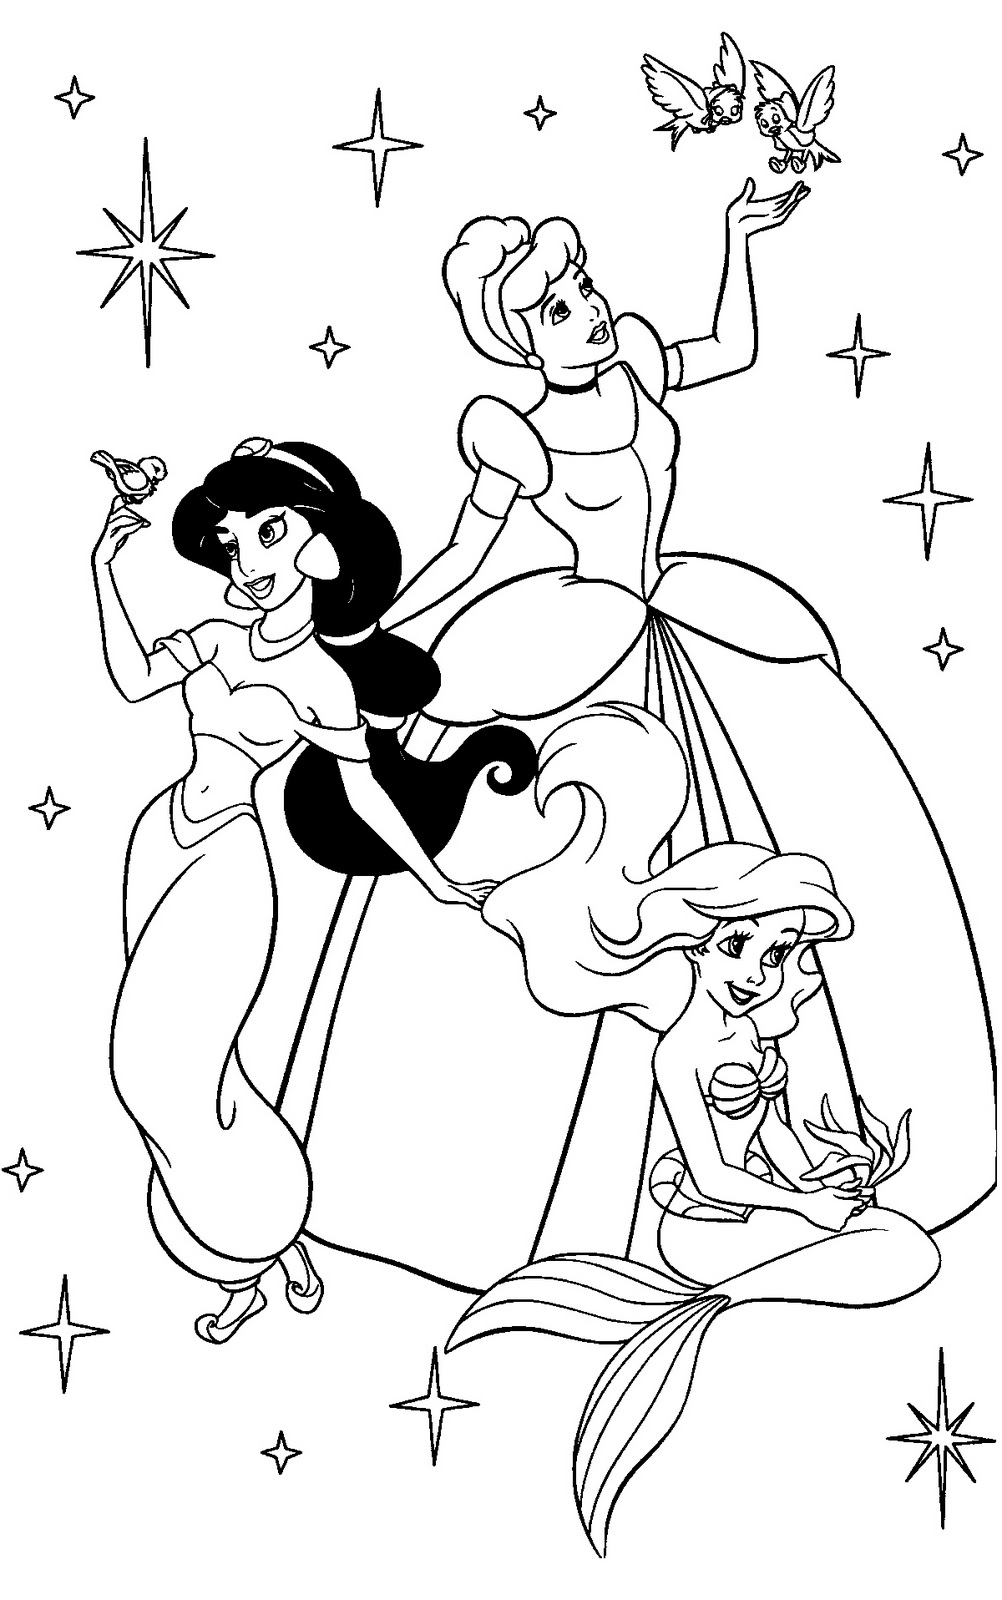 Disney Princesses - Best Coloring Pages - Free Coloring Pages